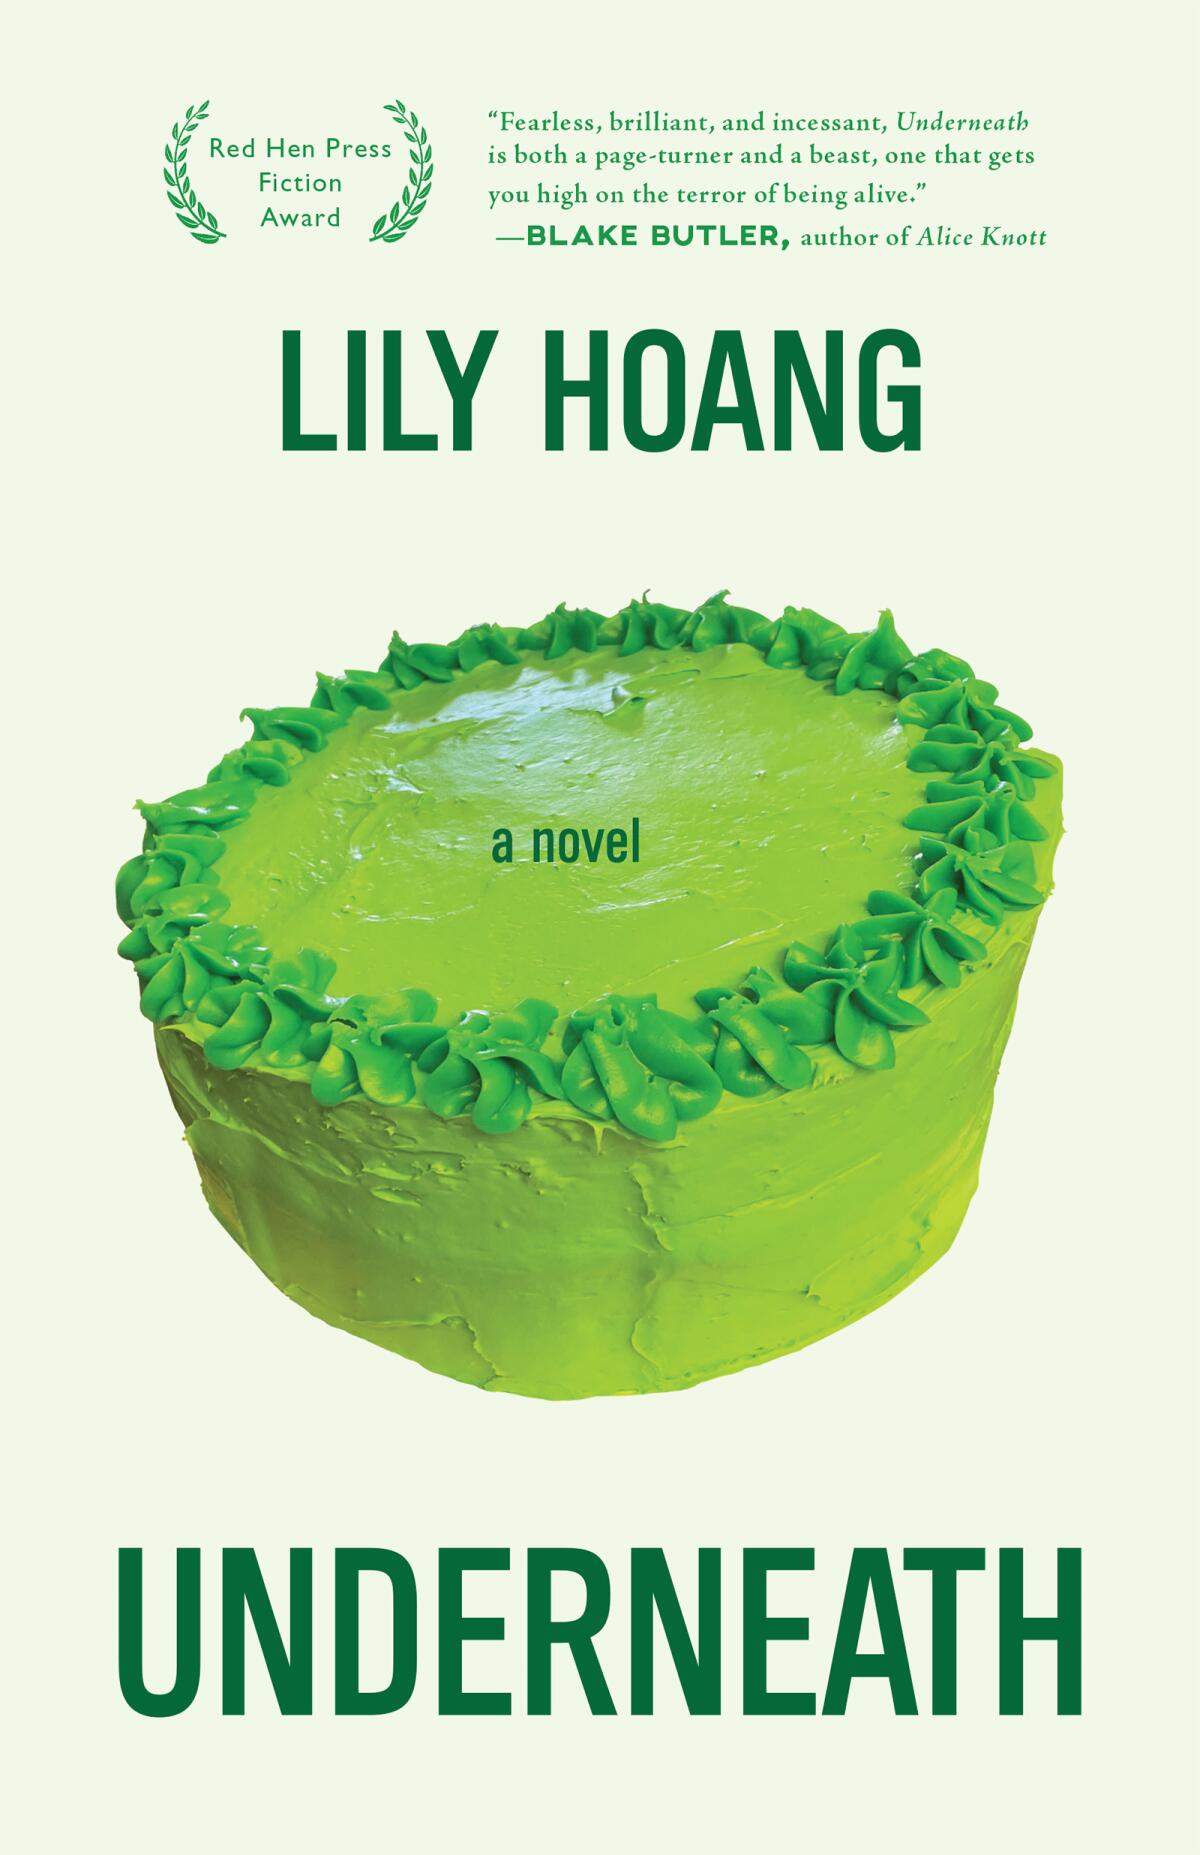 Lily Hoang, author of the forthcoming novel "Underneath."